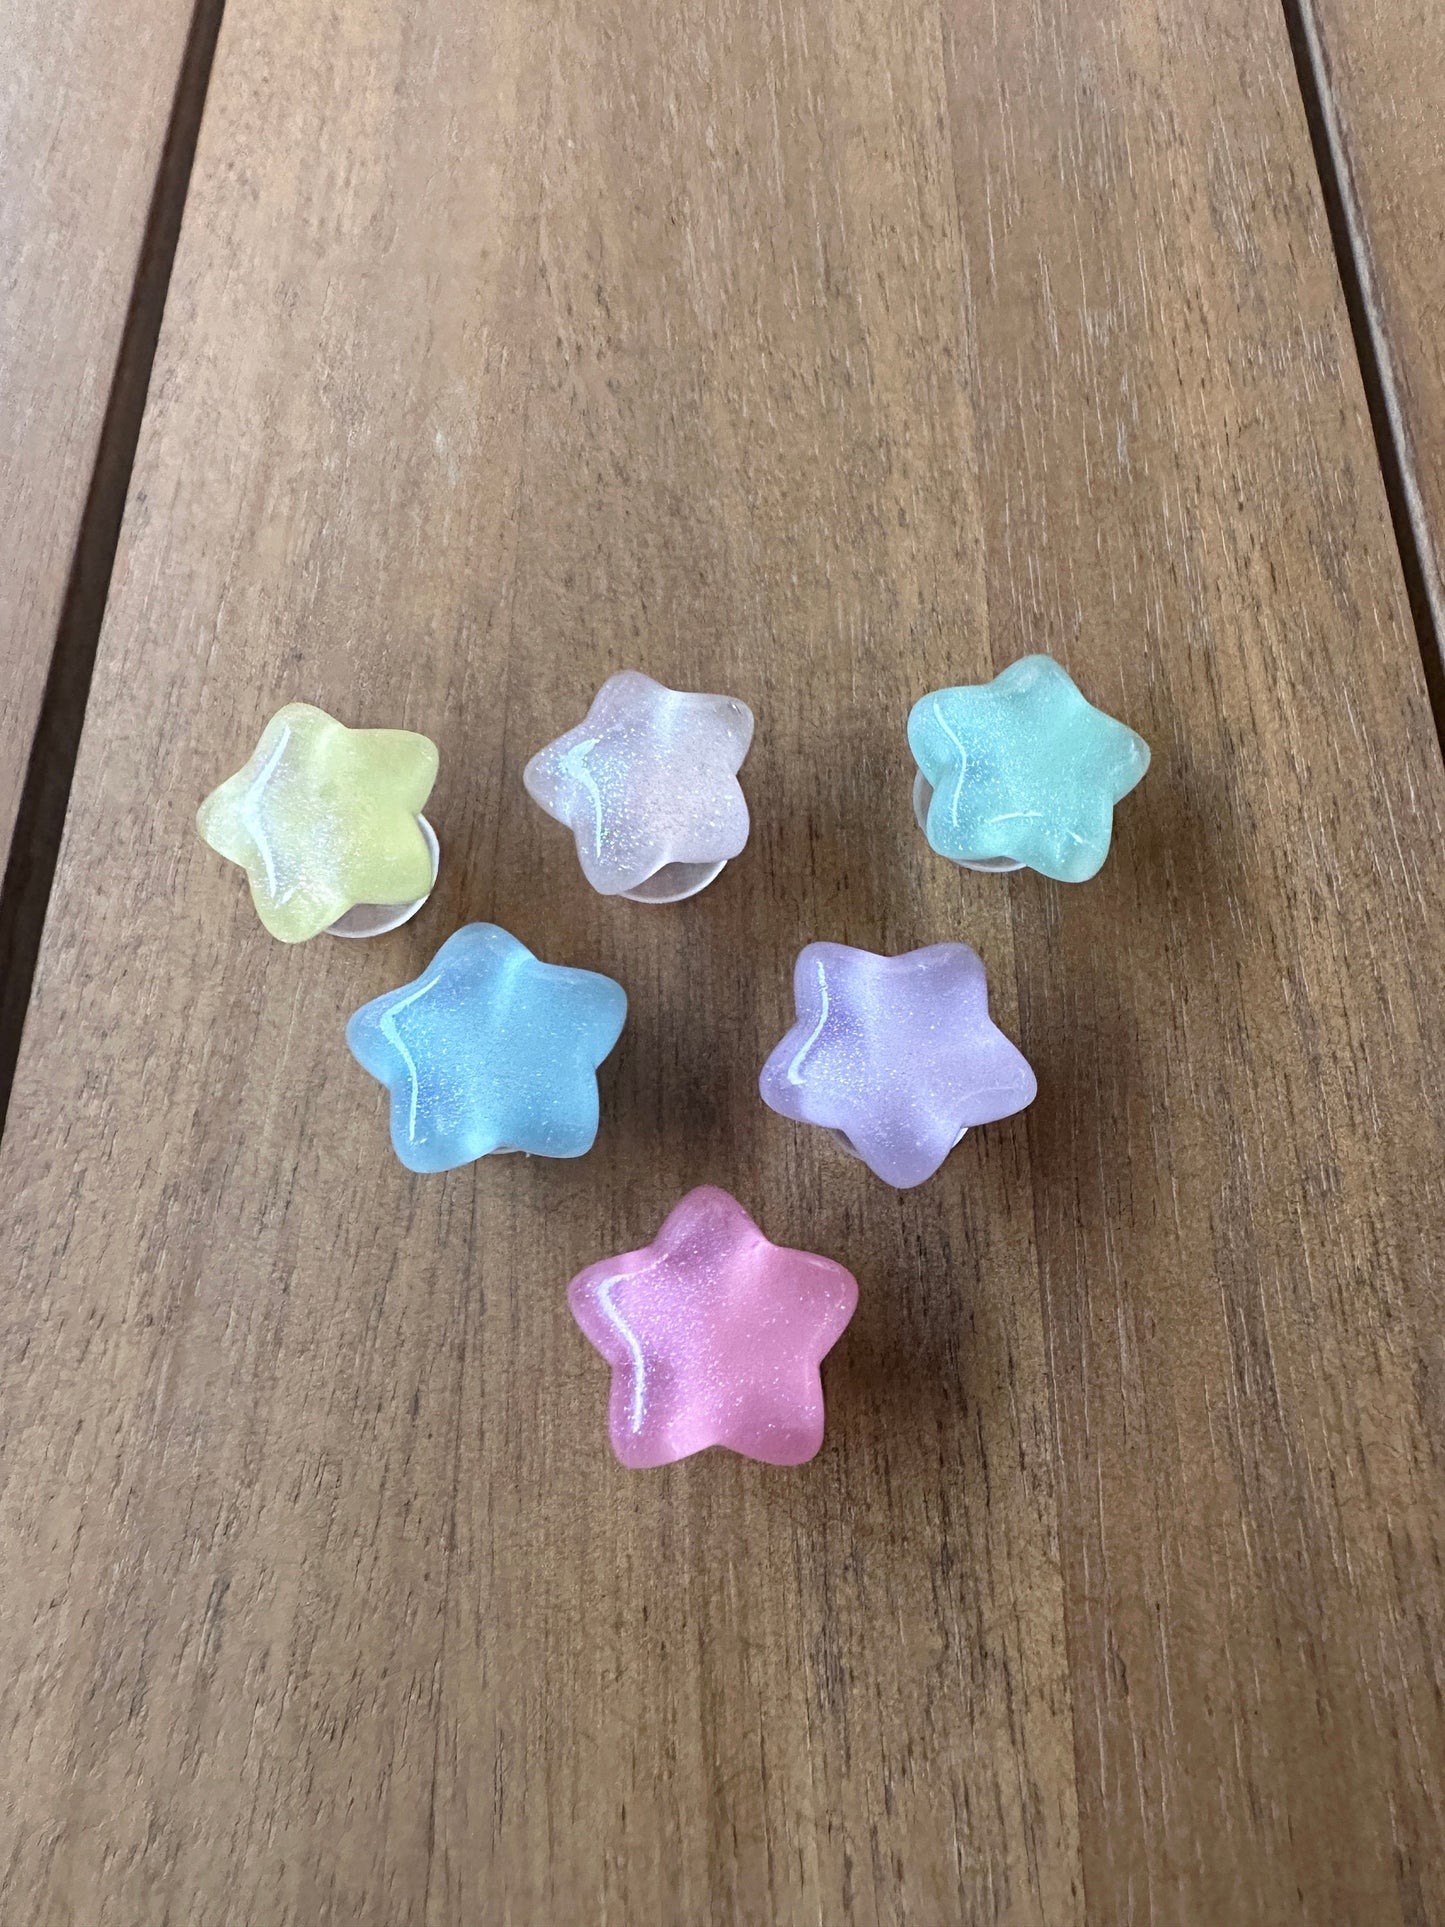 Jelly star Shoe charms | Chibi star | Shoe charms | kawaii aesthetic | gummy stars | gummy shoe charms | rubber clog charms | puffy stars